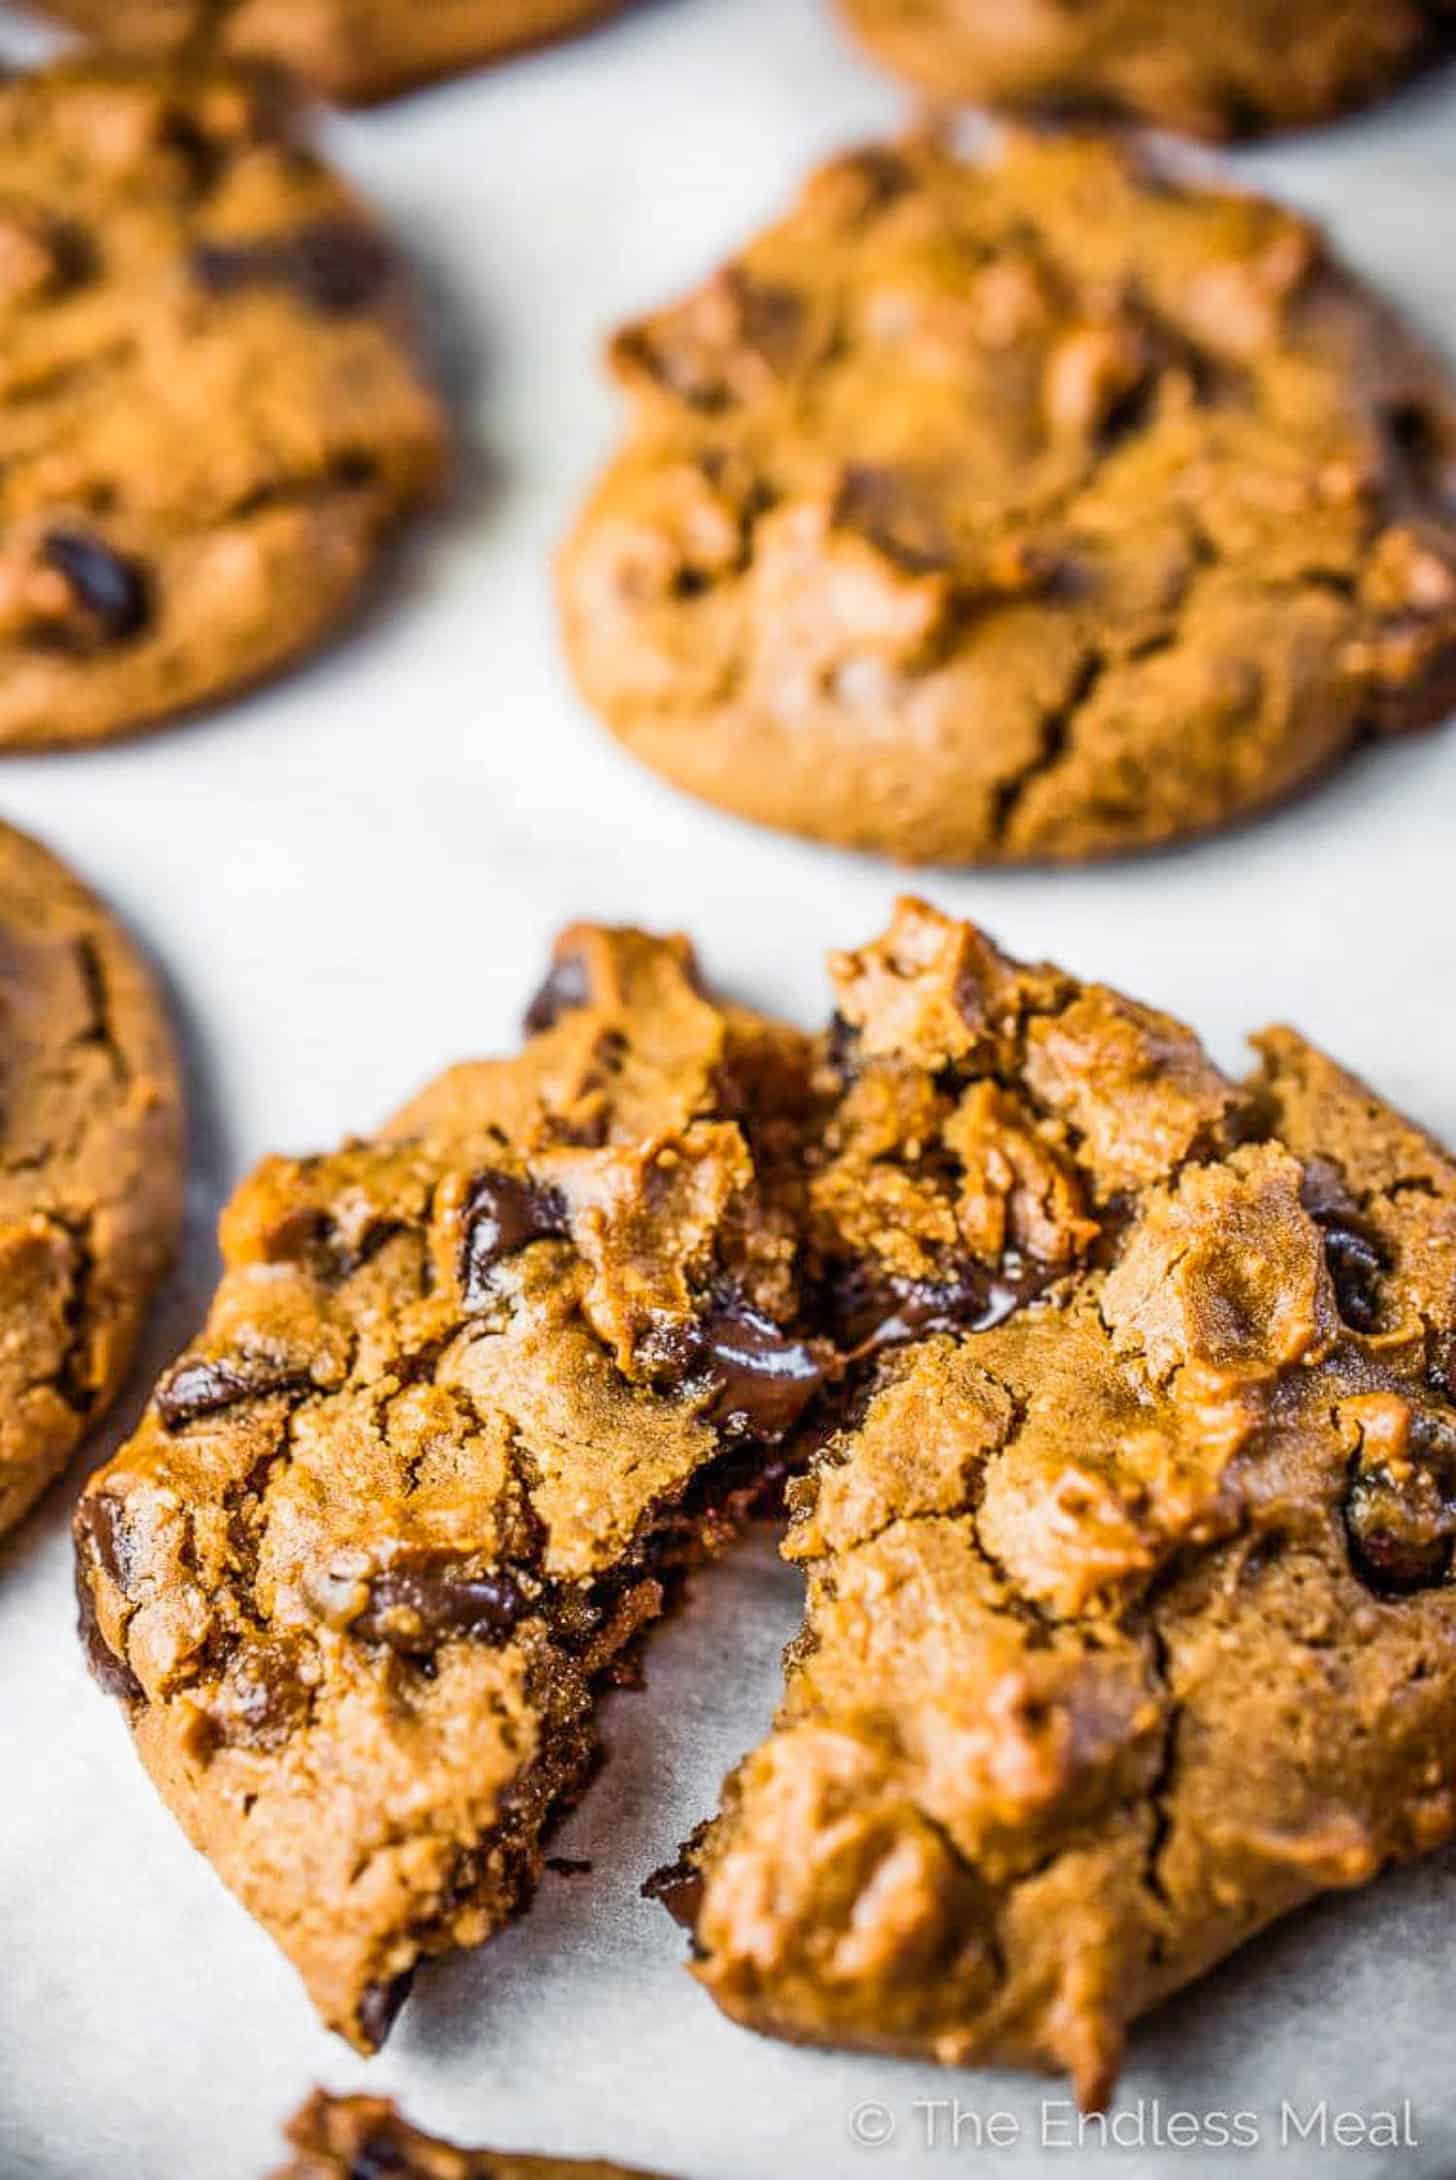 Chickpea Peanut Butter Cookies with melting chocolate chips